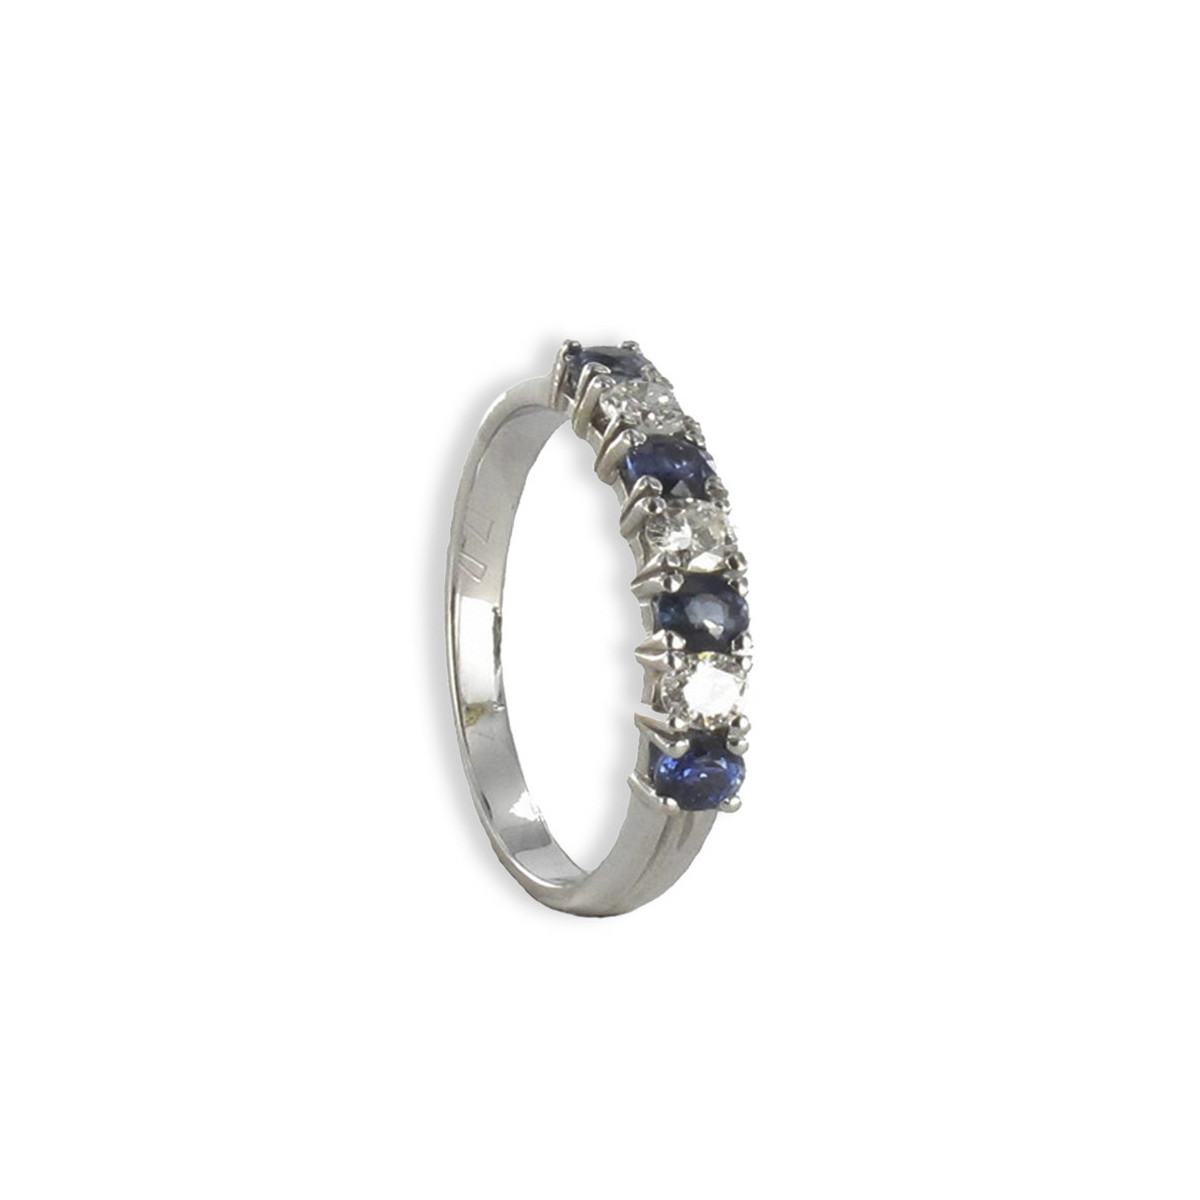 WHITE GOLD RING WITH 4 SAPPHIRES AND 3 DIAMONDS